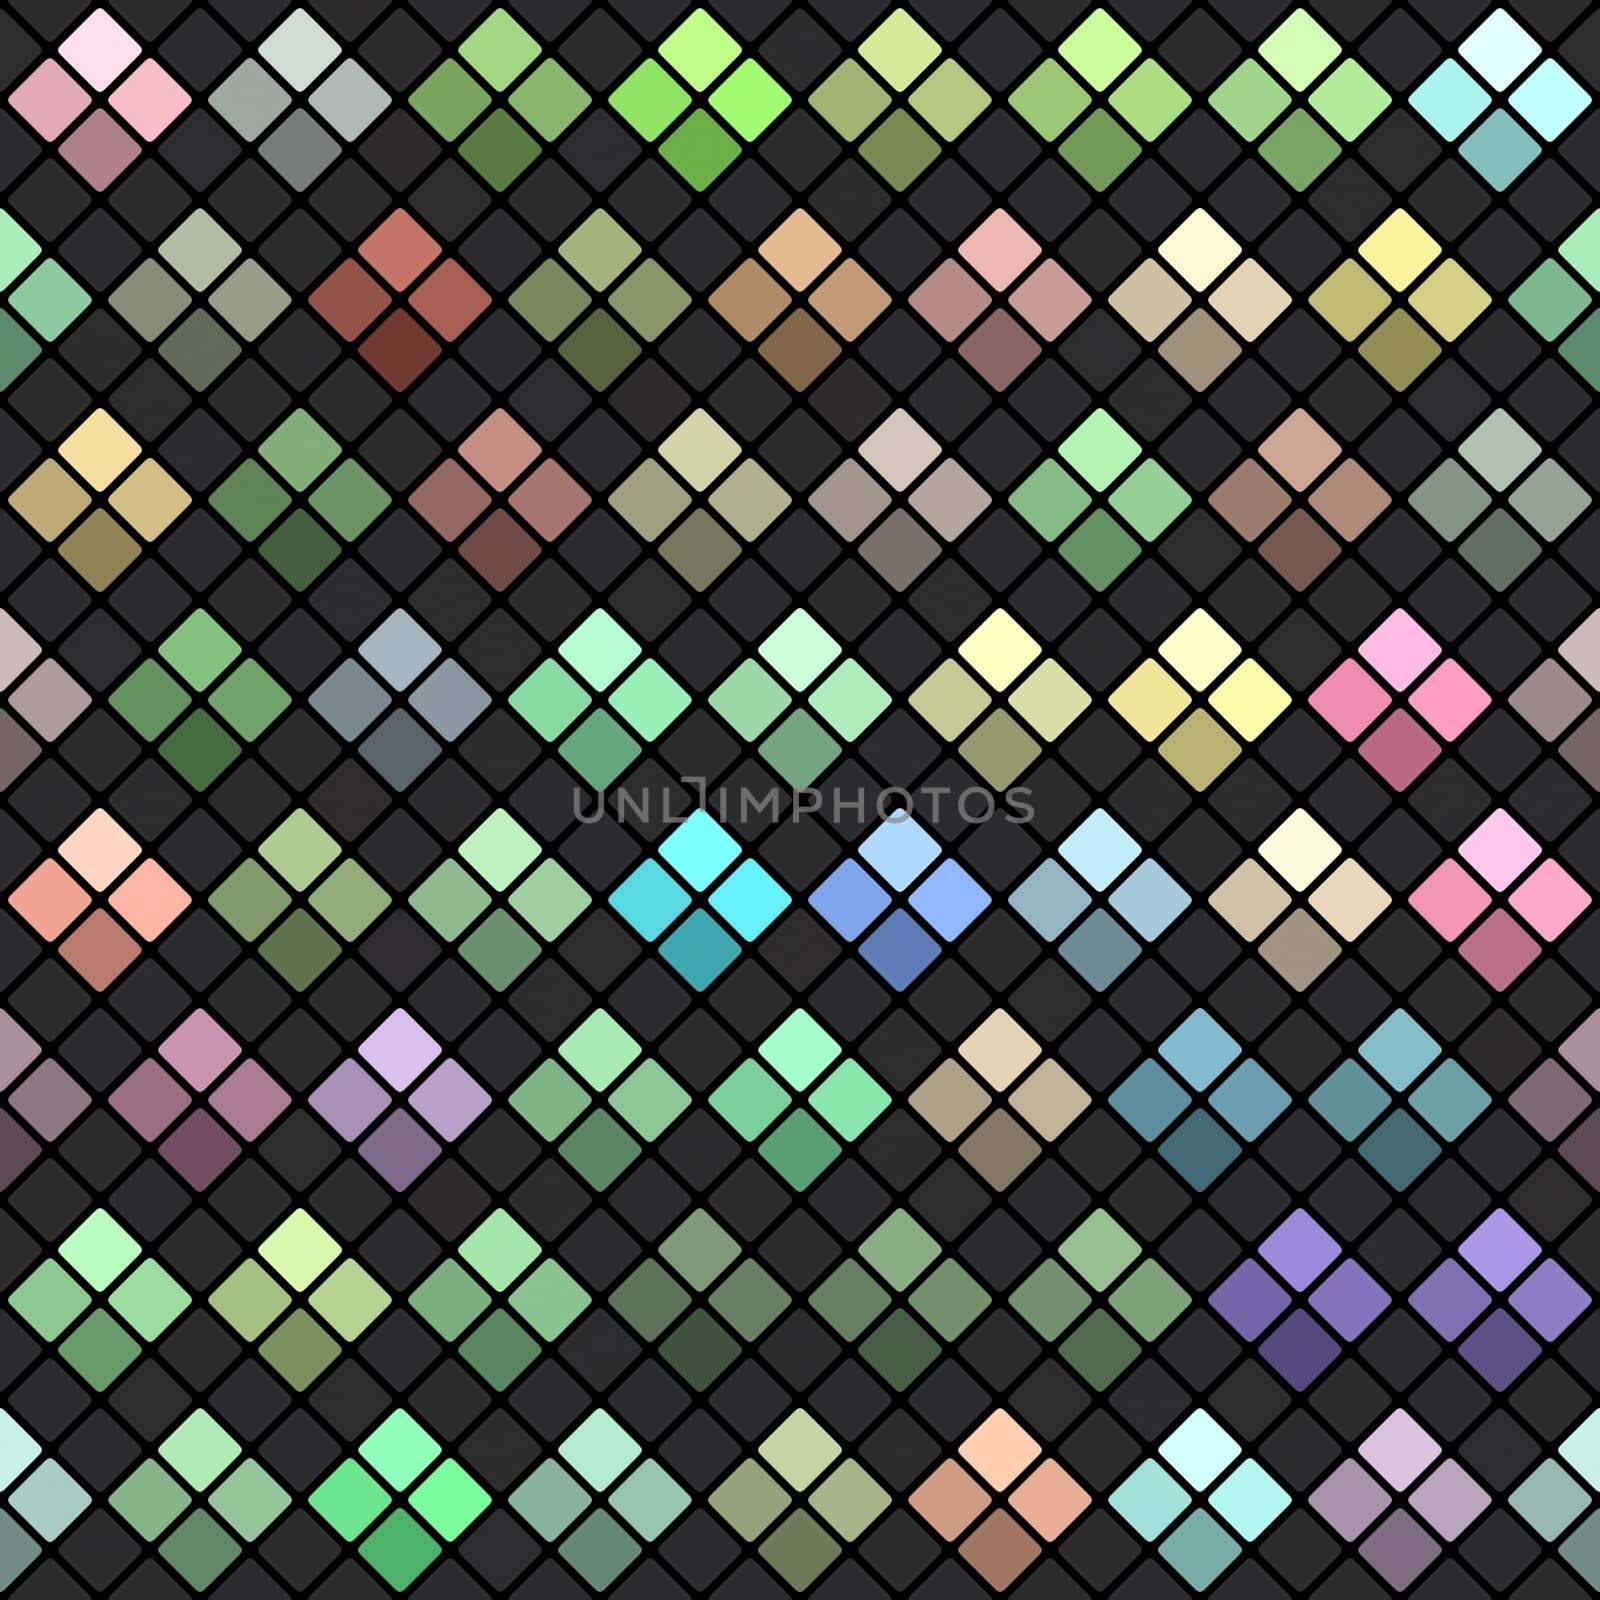 seamless chequered texture of colorful squares 